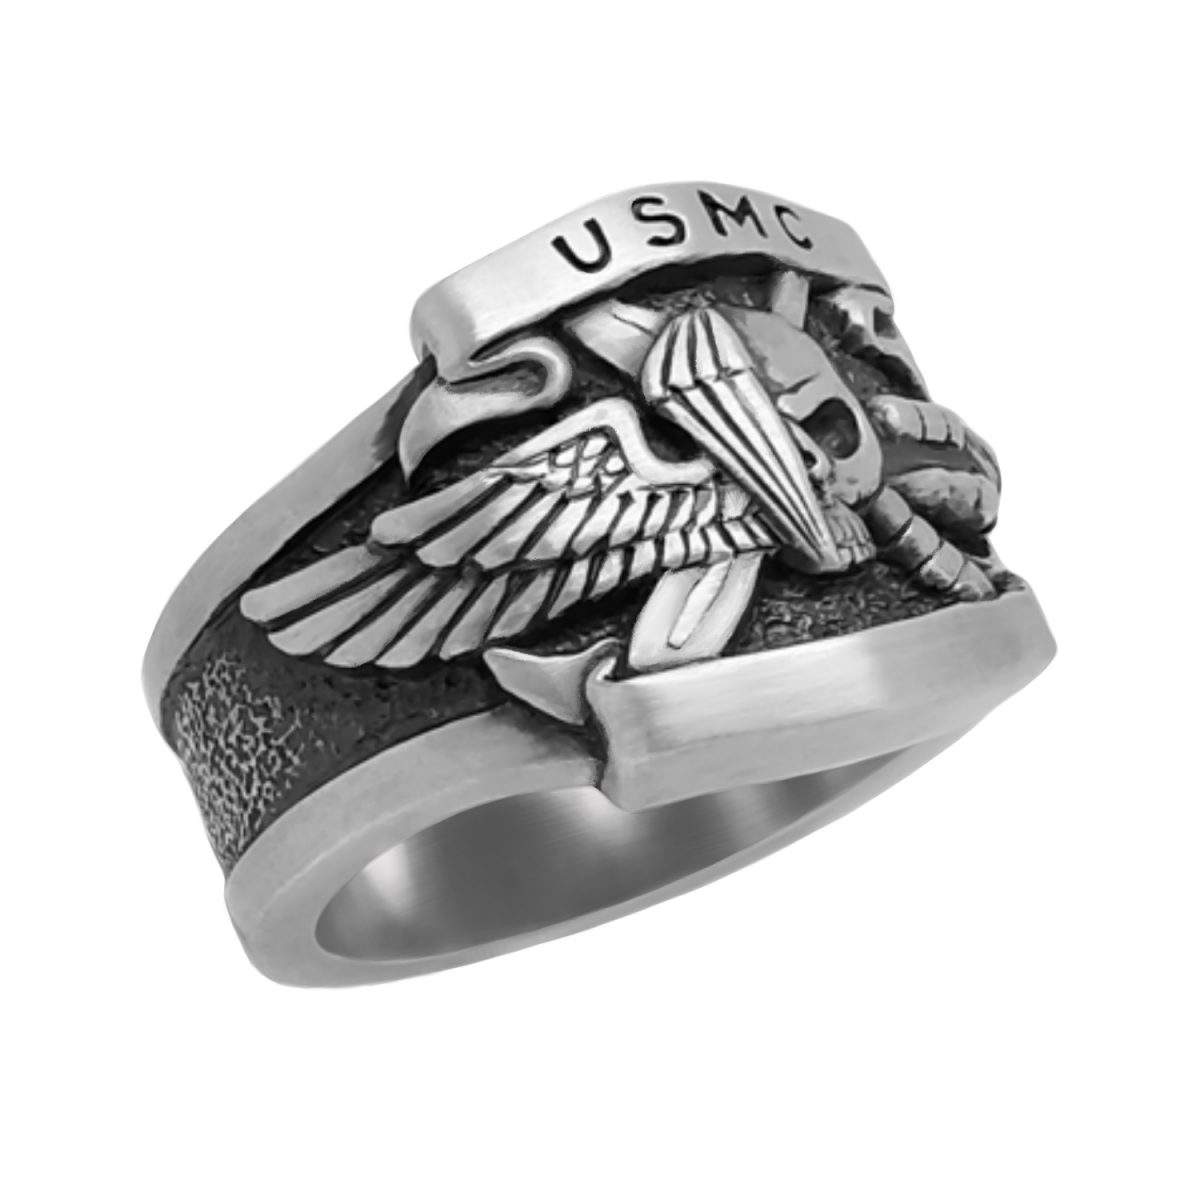 Sterling Silver 925 Us Marine Corps Biker Men's Band Ring Handcrafted ...